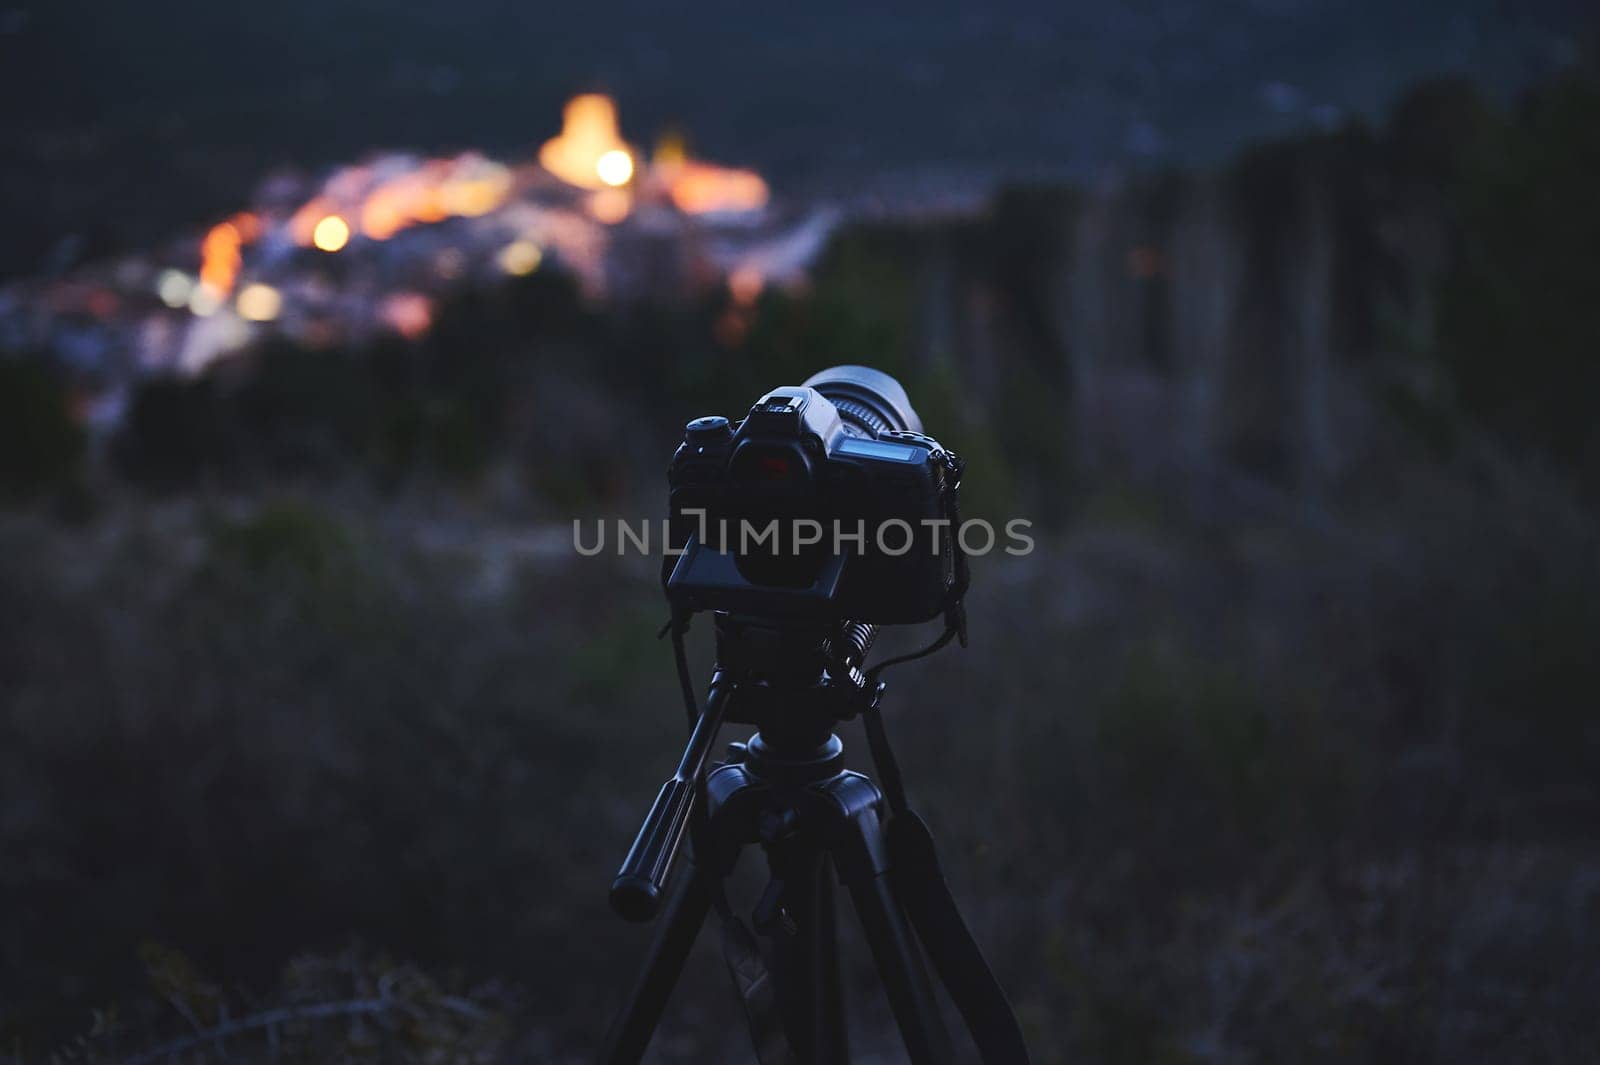 Digital camera placed on tripod, capturing the Andalusian medieval city of Quesada in mountains Sierra de Cazorla at dawn. Blurred mountains on background. Travel photography. World photography Day by artgf